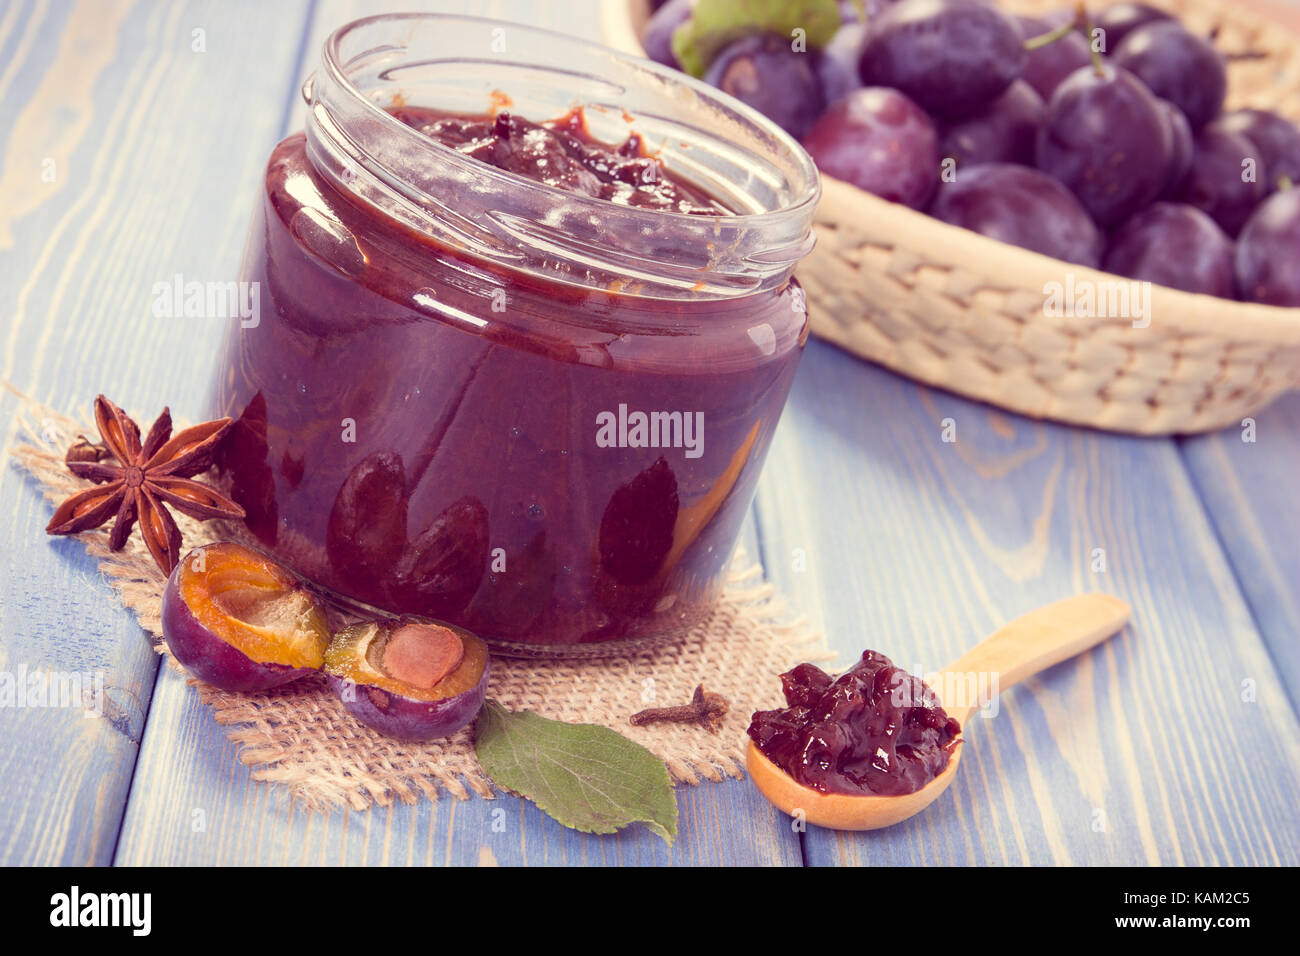 Vintage photo, Fresh homemade plum marmalade in glass jar, spices and ripe fruits in wicker basket in background, concept of healthy sweet dessert Stock Photo